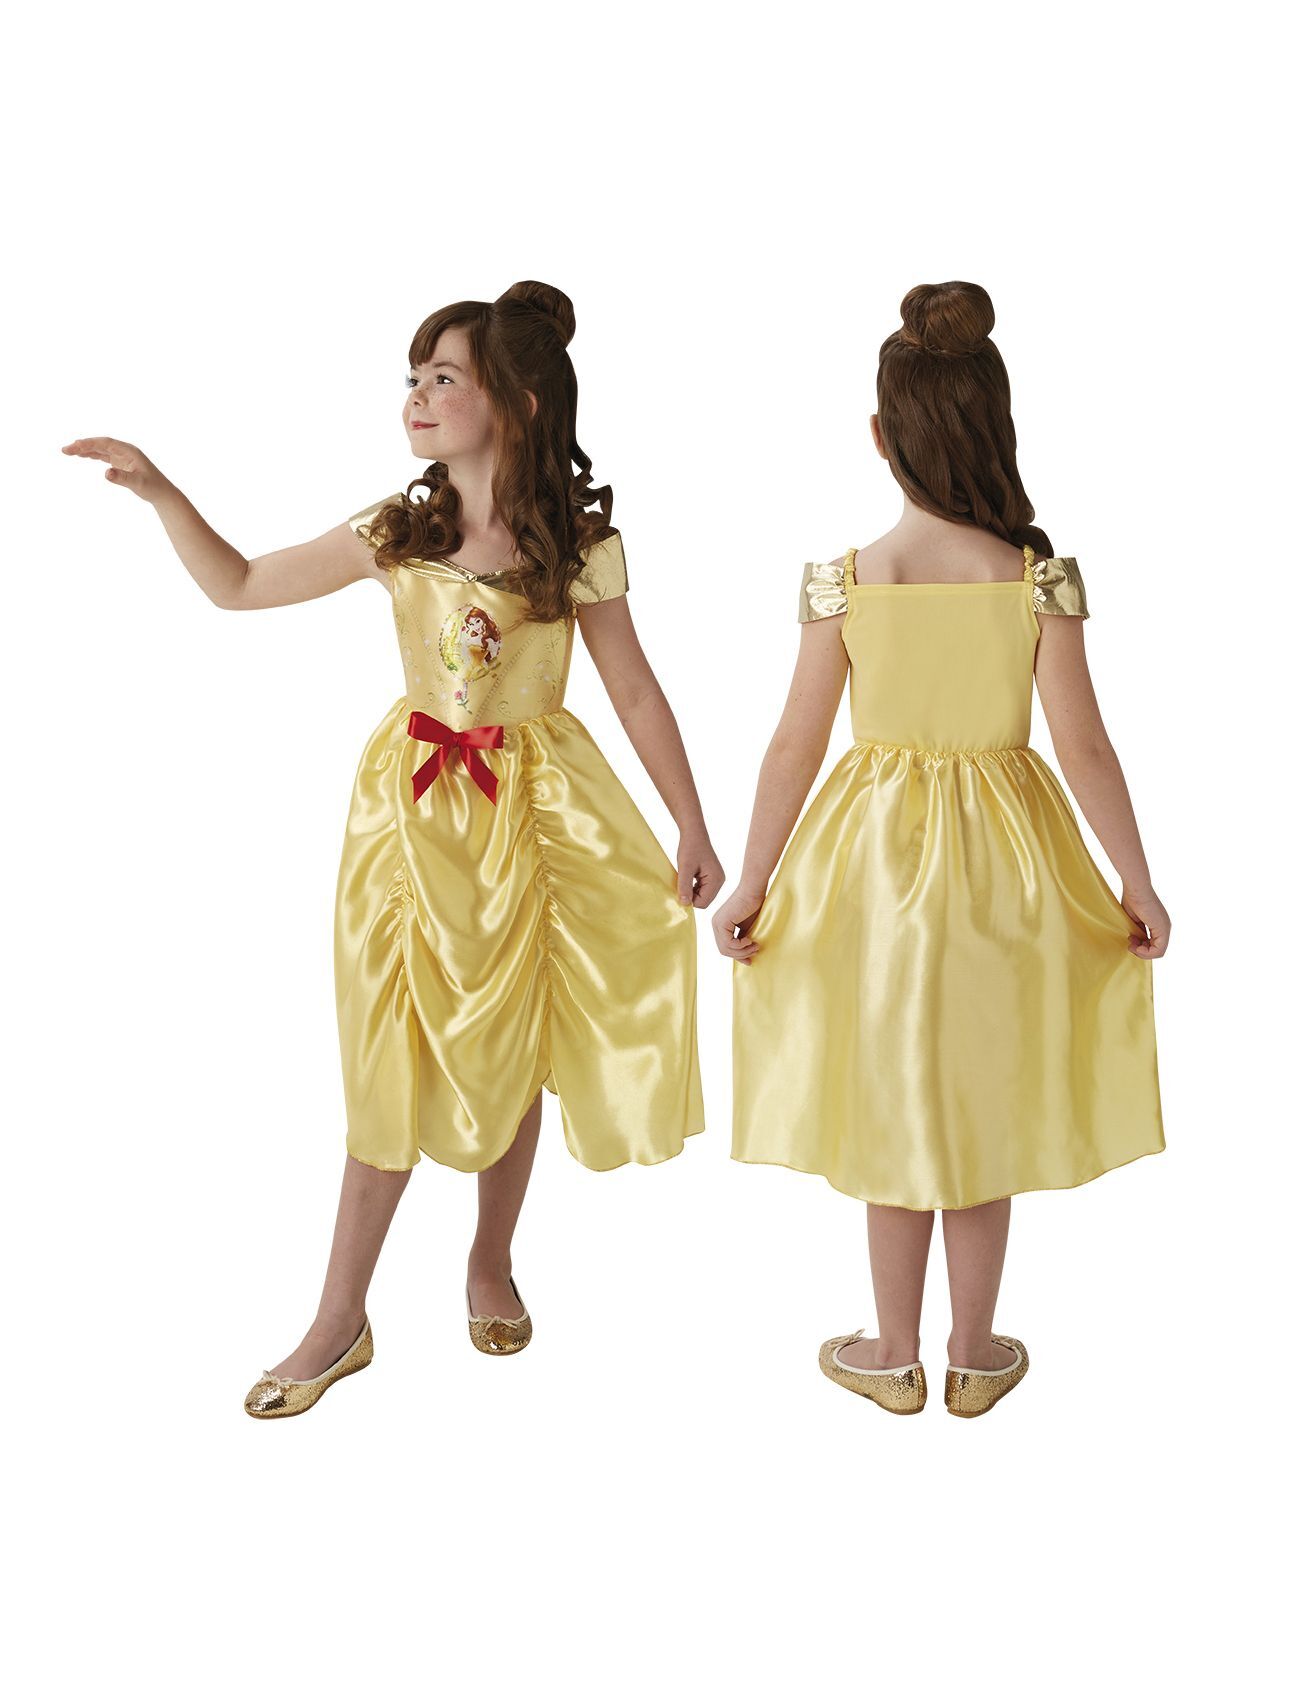 Rubies Costume Rubies Fairytale Belle S 104 Cl Toys Costumes & Accessories Character Costumes Multi/mønstret Rubies